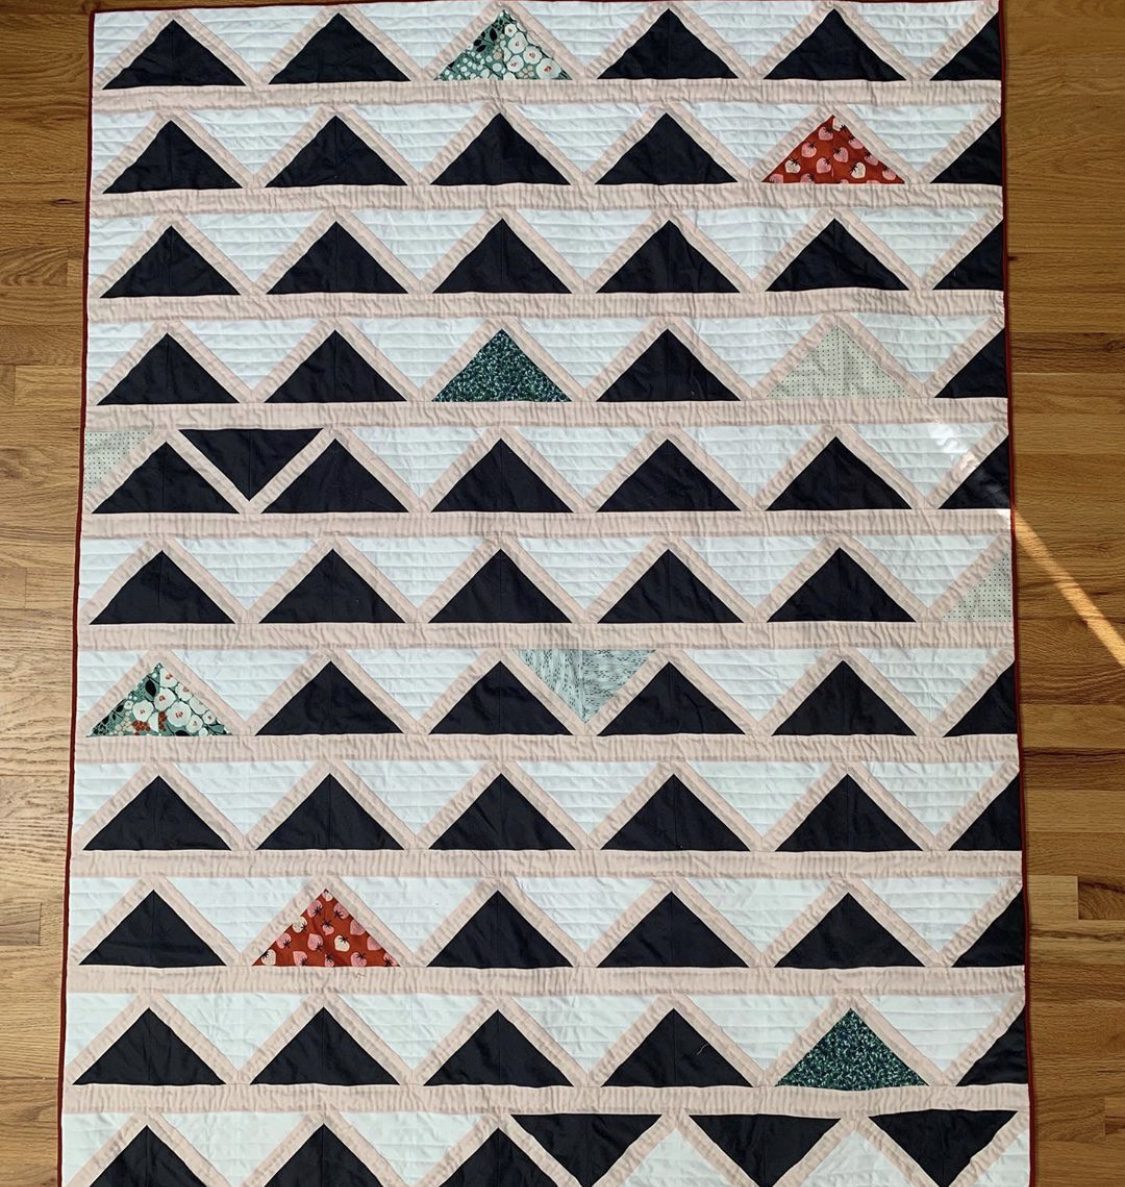 Black and White Cafe Tile Quilt Top 